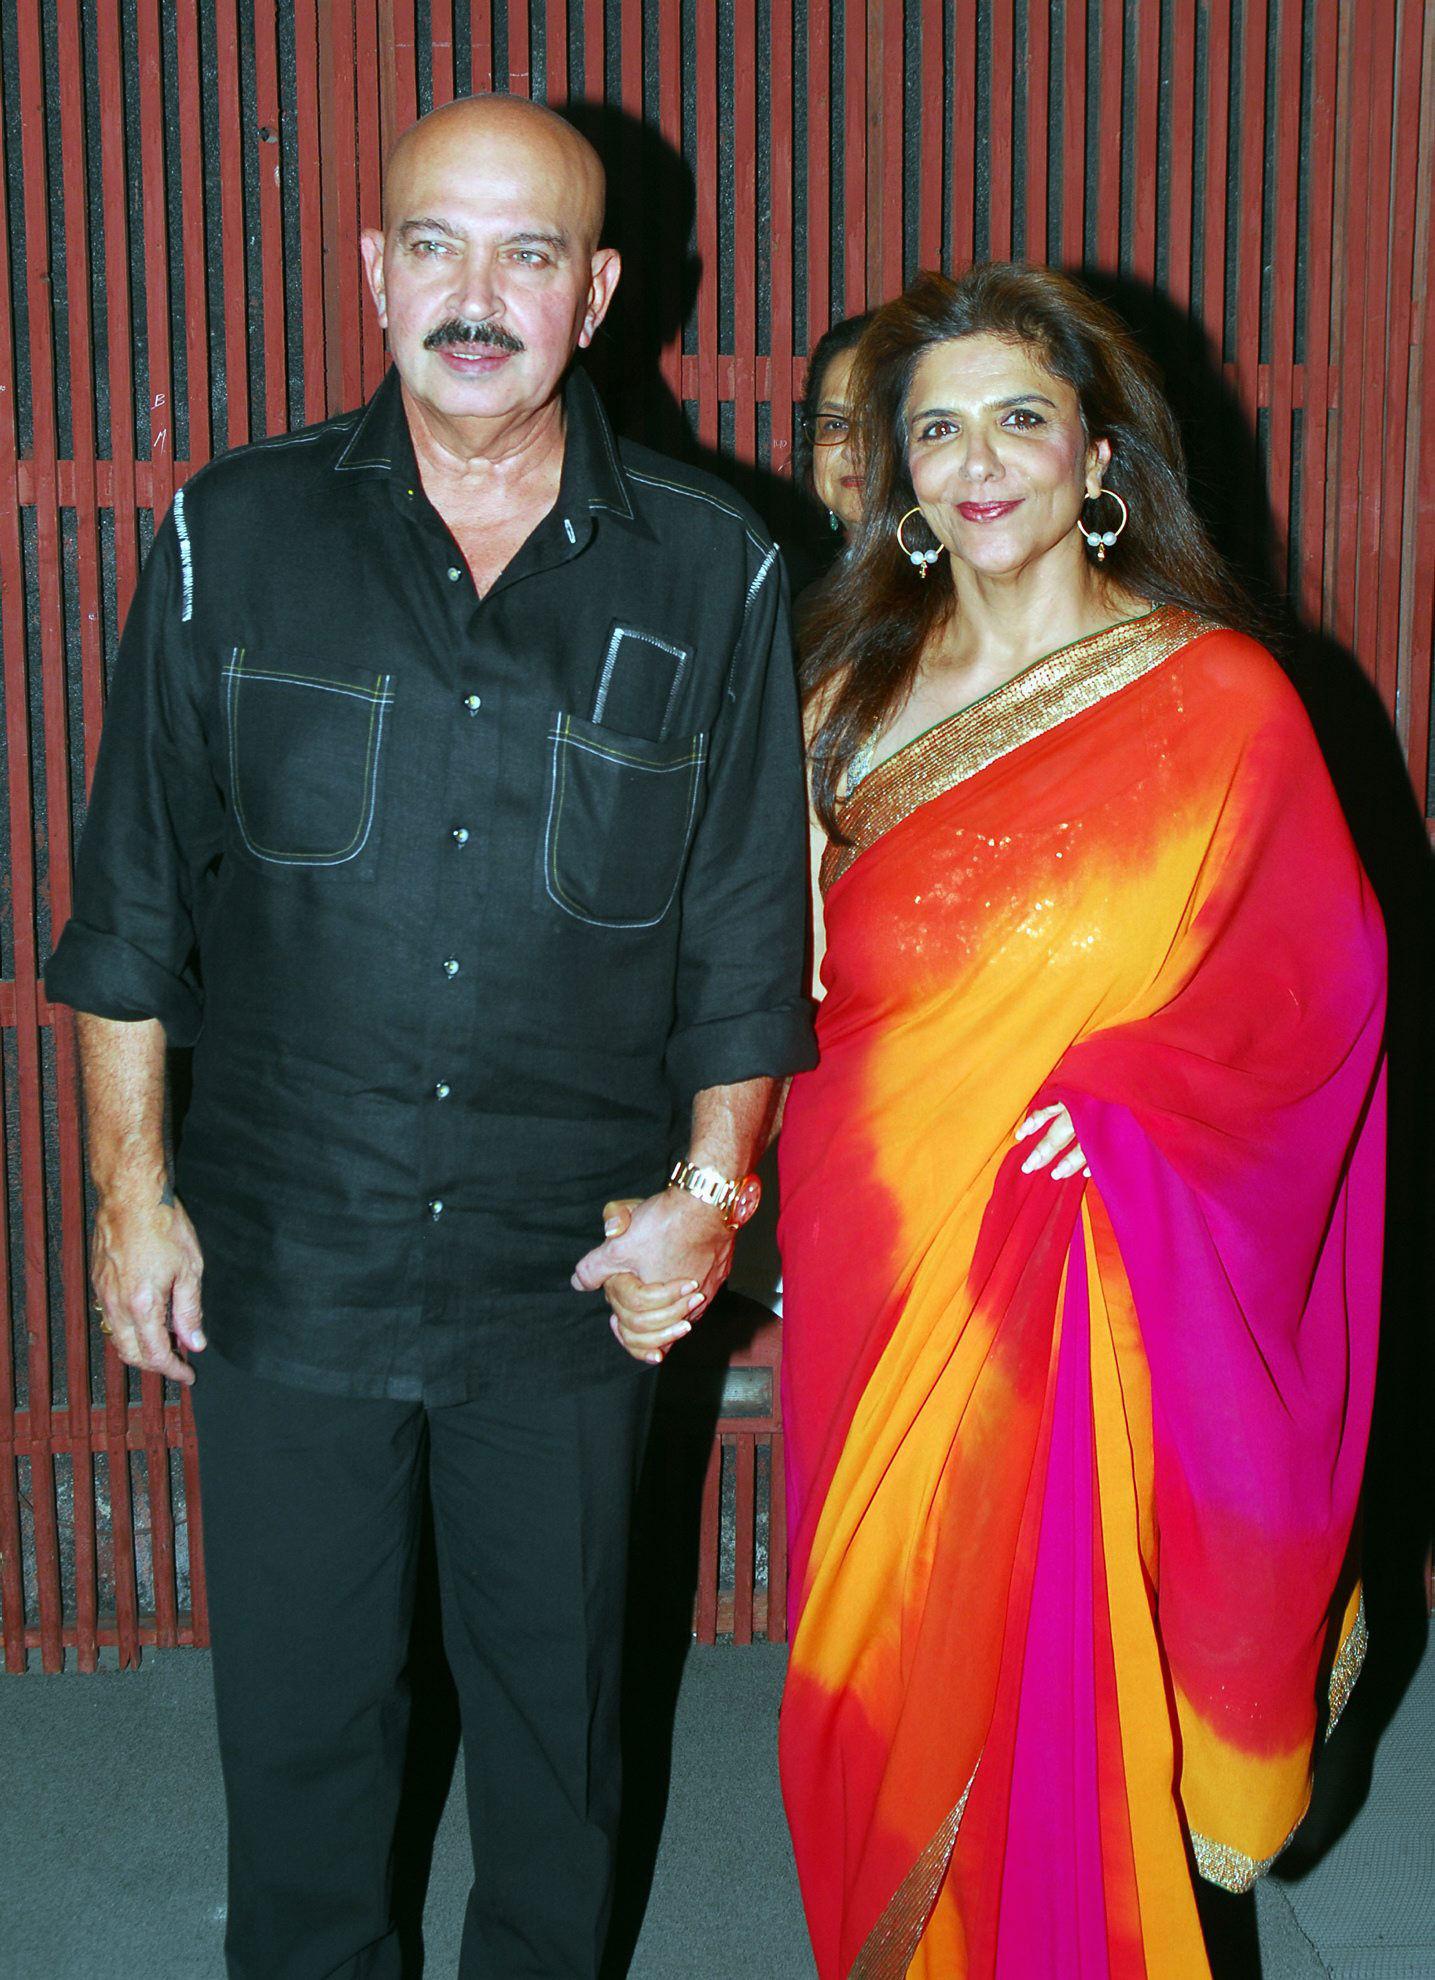 Let's take a look at a few more candid pictures of Rakesh Roshan. Rakesh Roshan and Pinky Roshan hand-in-hand. Pinky comes from a filmy background. She is the daughter of popular filmmaker J. Om Prakash. The couple has a son, Hrithik Roshan and a daughter, Sunaina.